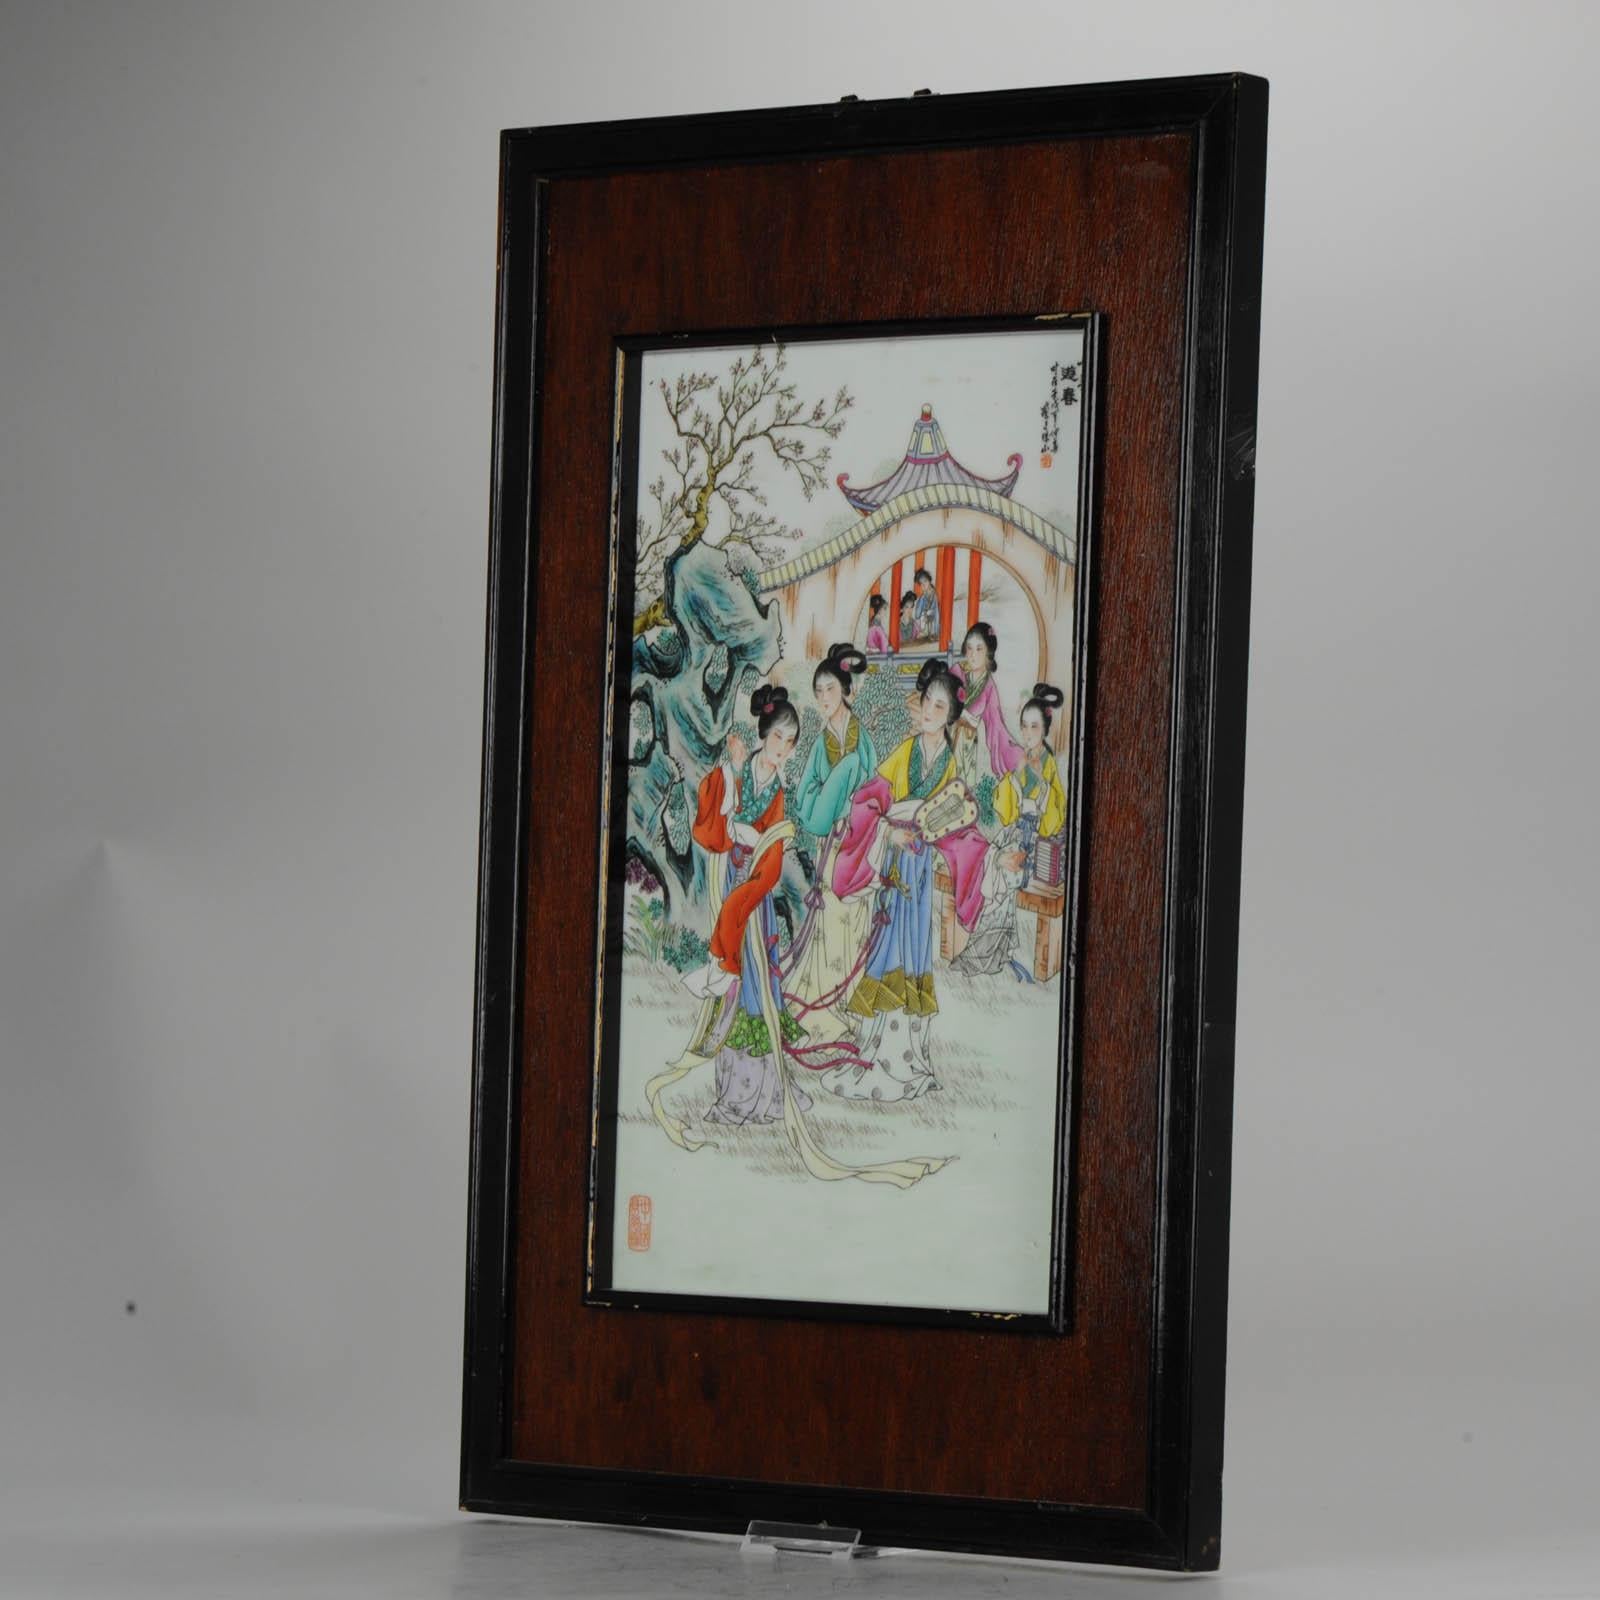 Porcelain plaque in nice wooden frame, with characters ladies in a garden.

11-10-19-16-2

The plaque will be sent with track and trace, safely packed and insured. 
Condition
Overall condition perfect; Frame has some small age signs. Size